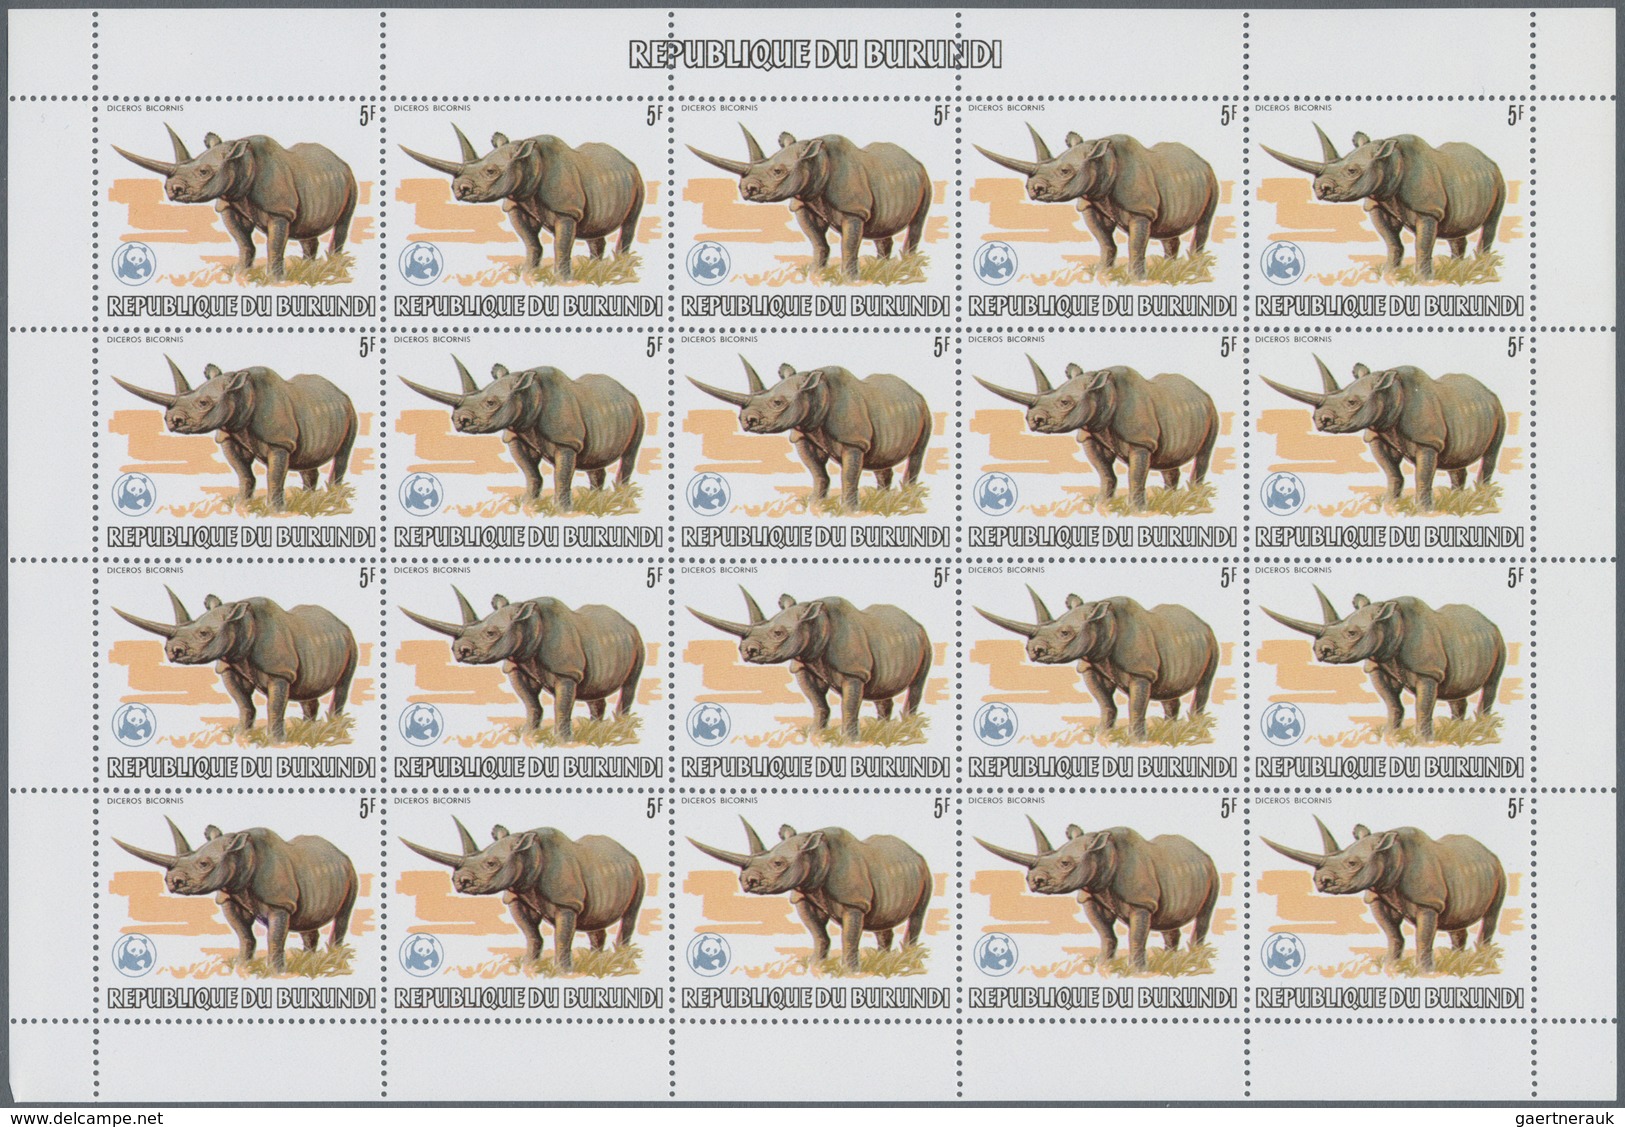 00677 Thematik: WWF: 1983, Burundi. WWF, Annimals. Set of 13 values in complete sheets of 20 with WWF OVER